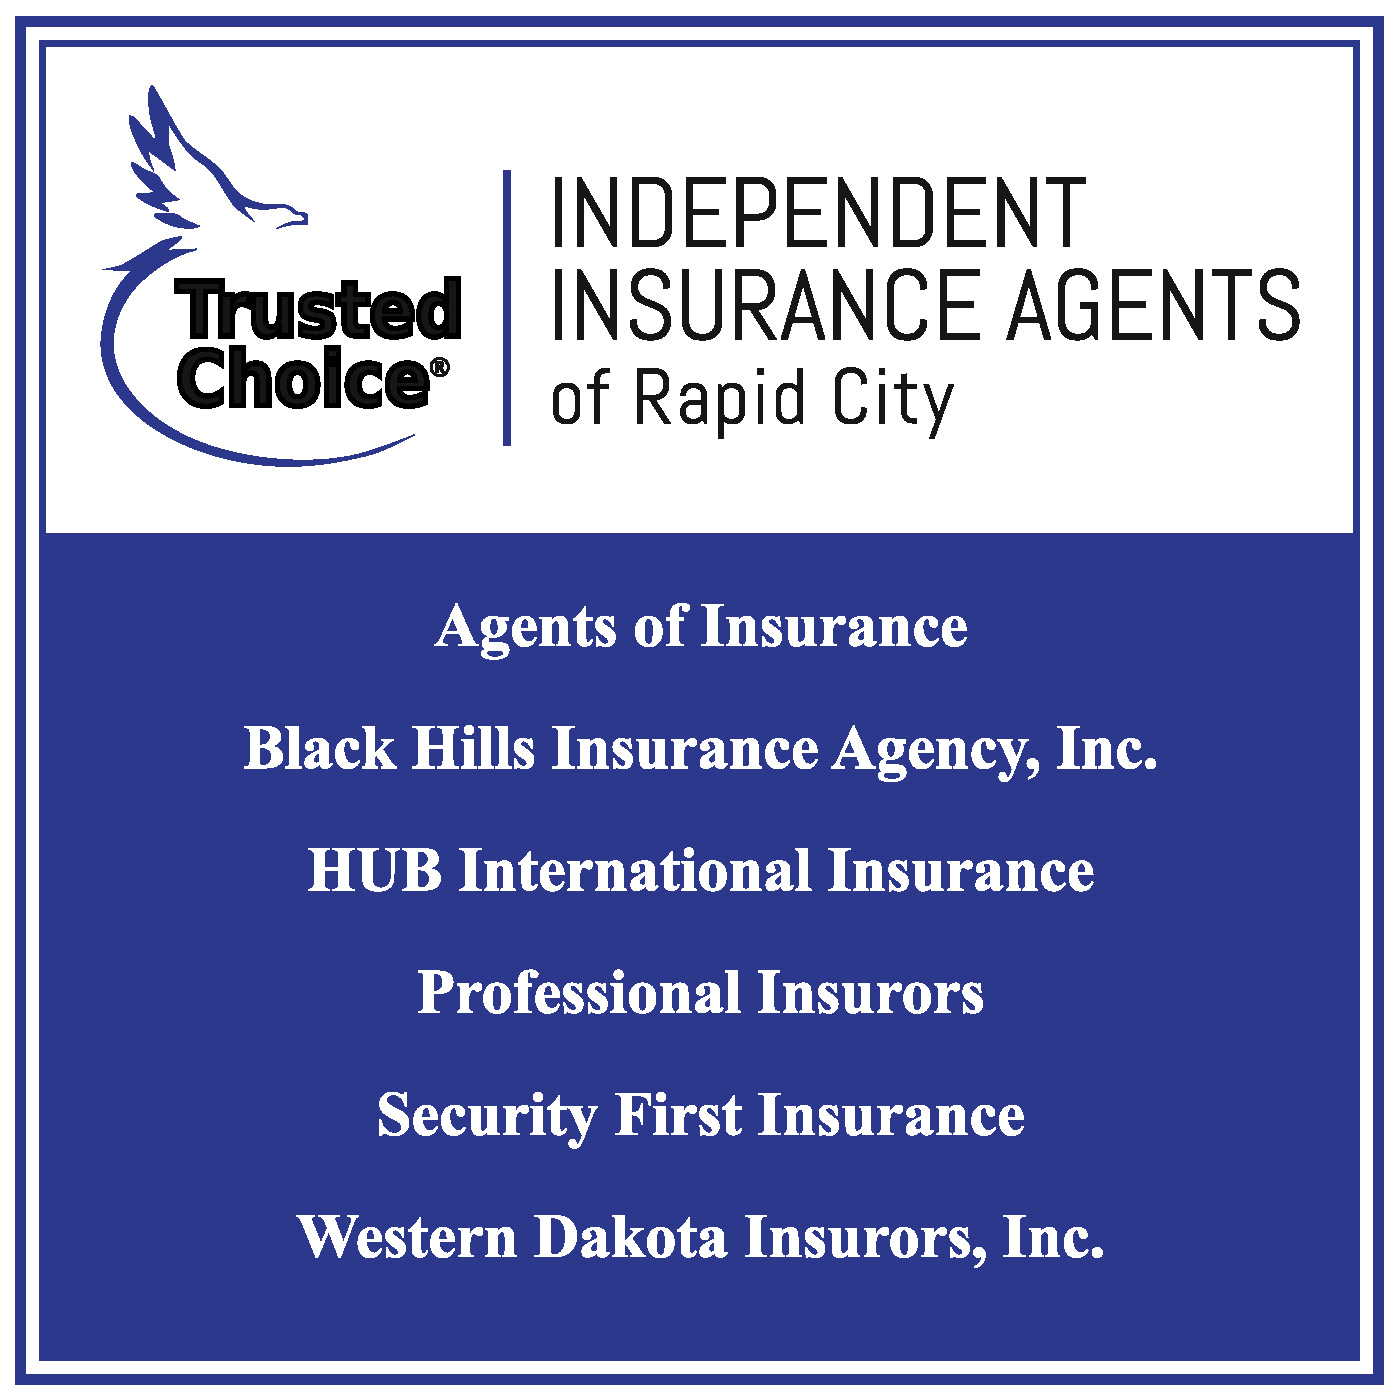 Independent Insurance Agents of Rapid City 